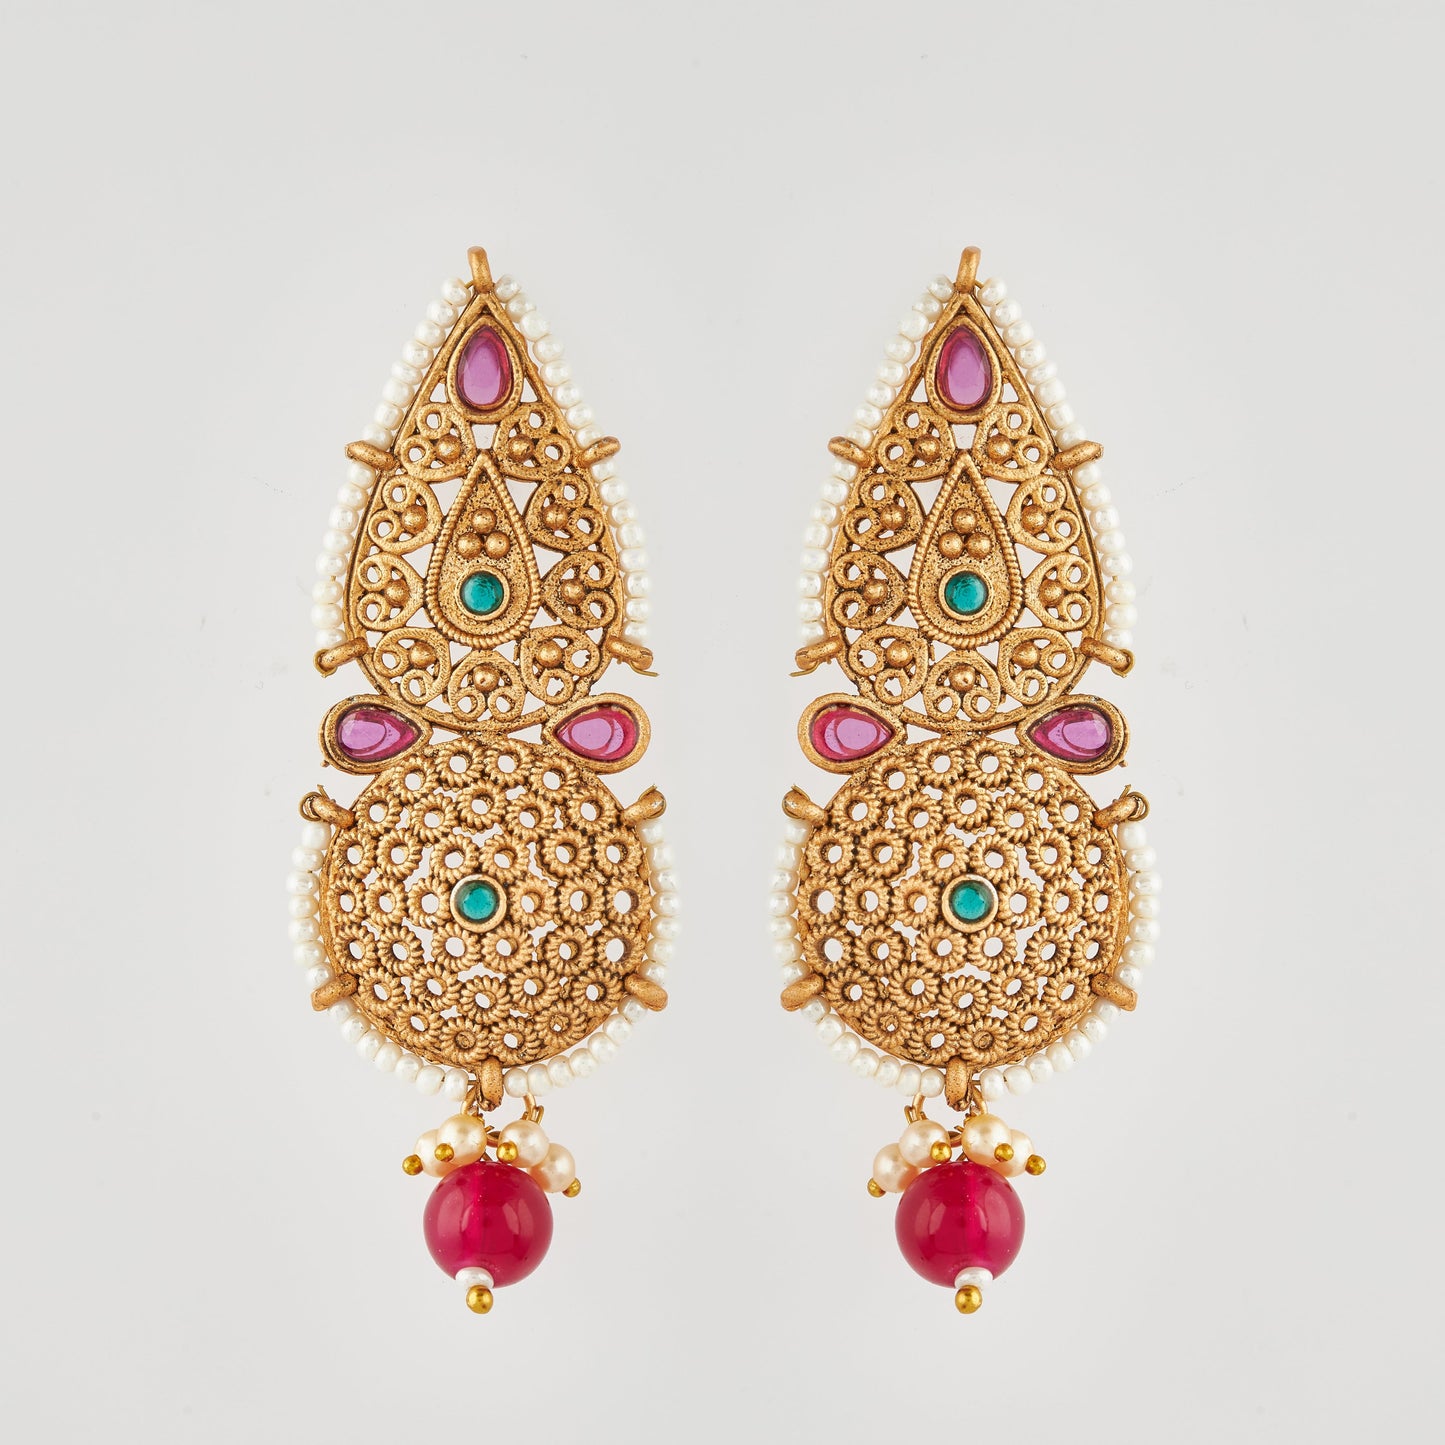 Gold-Toned Earrings with Eye-Catching Stone Detail